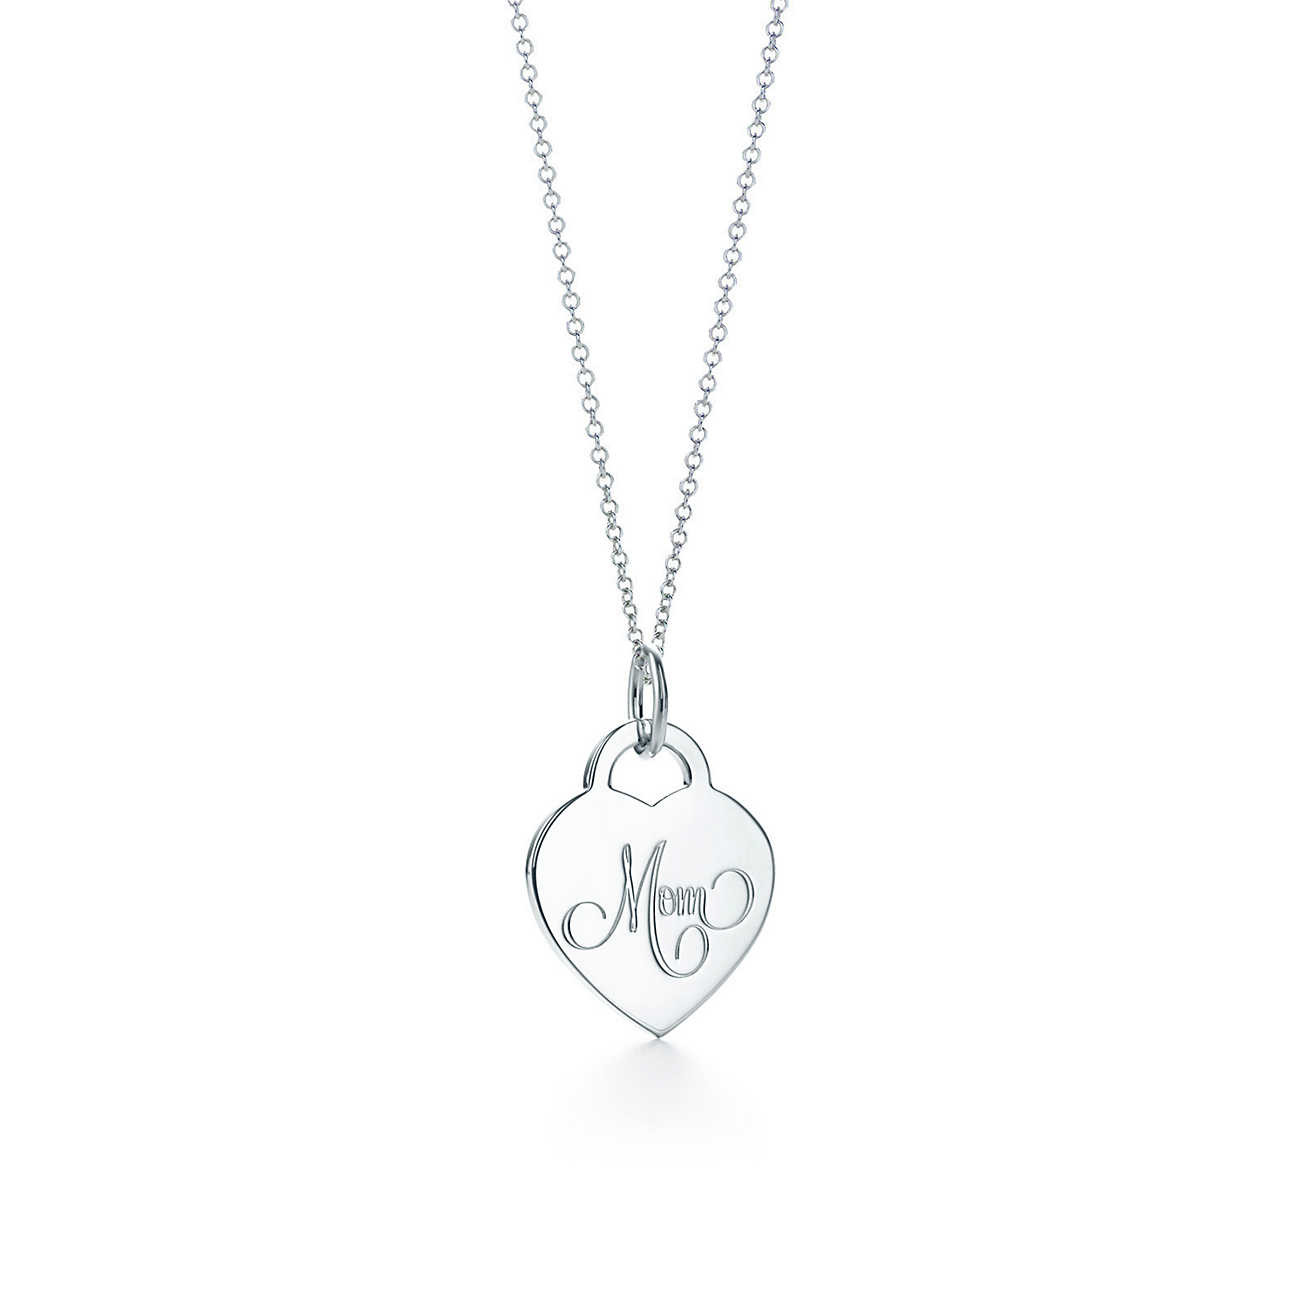 Mother Daughter Necklace Tiffany
 Mother Daughter Necklace Tiffany Traumspuren